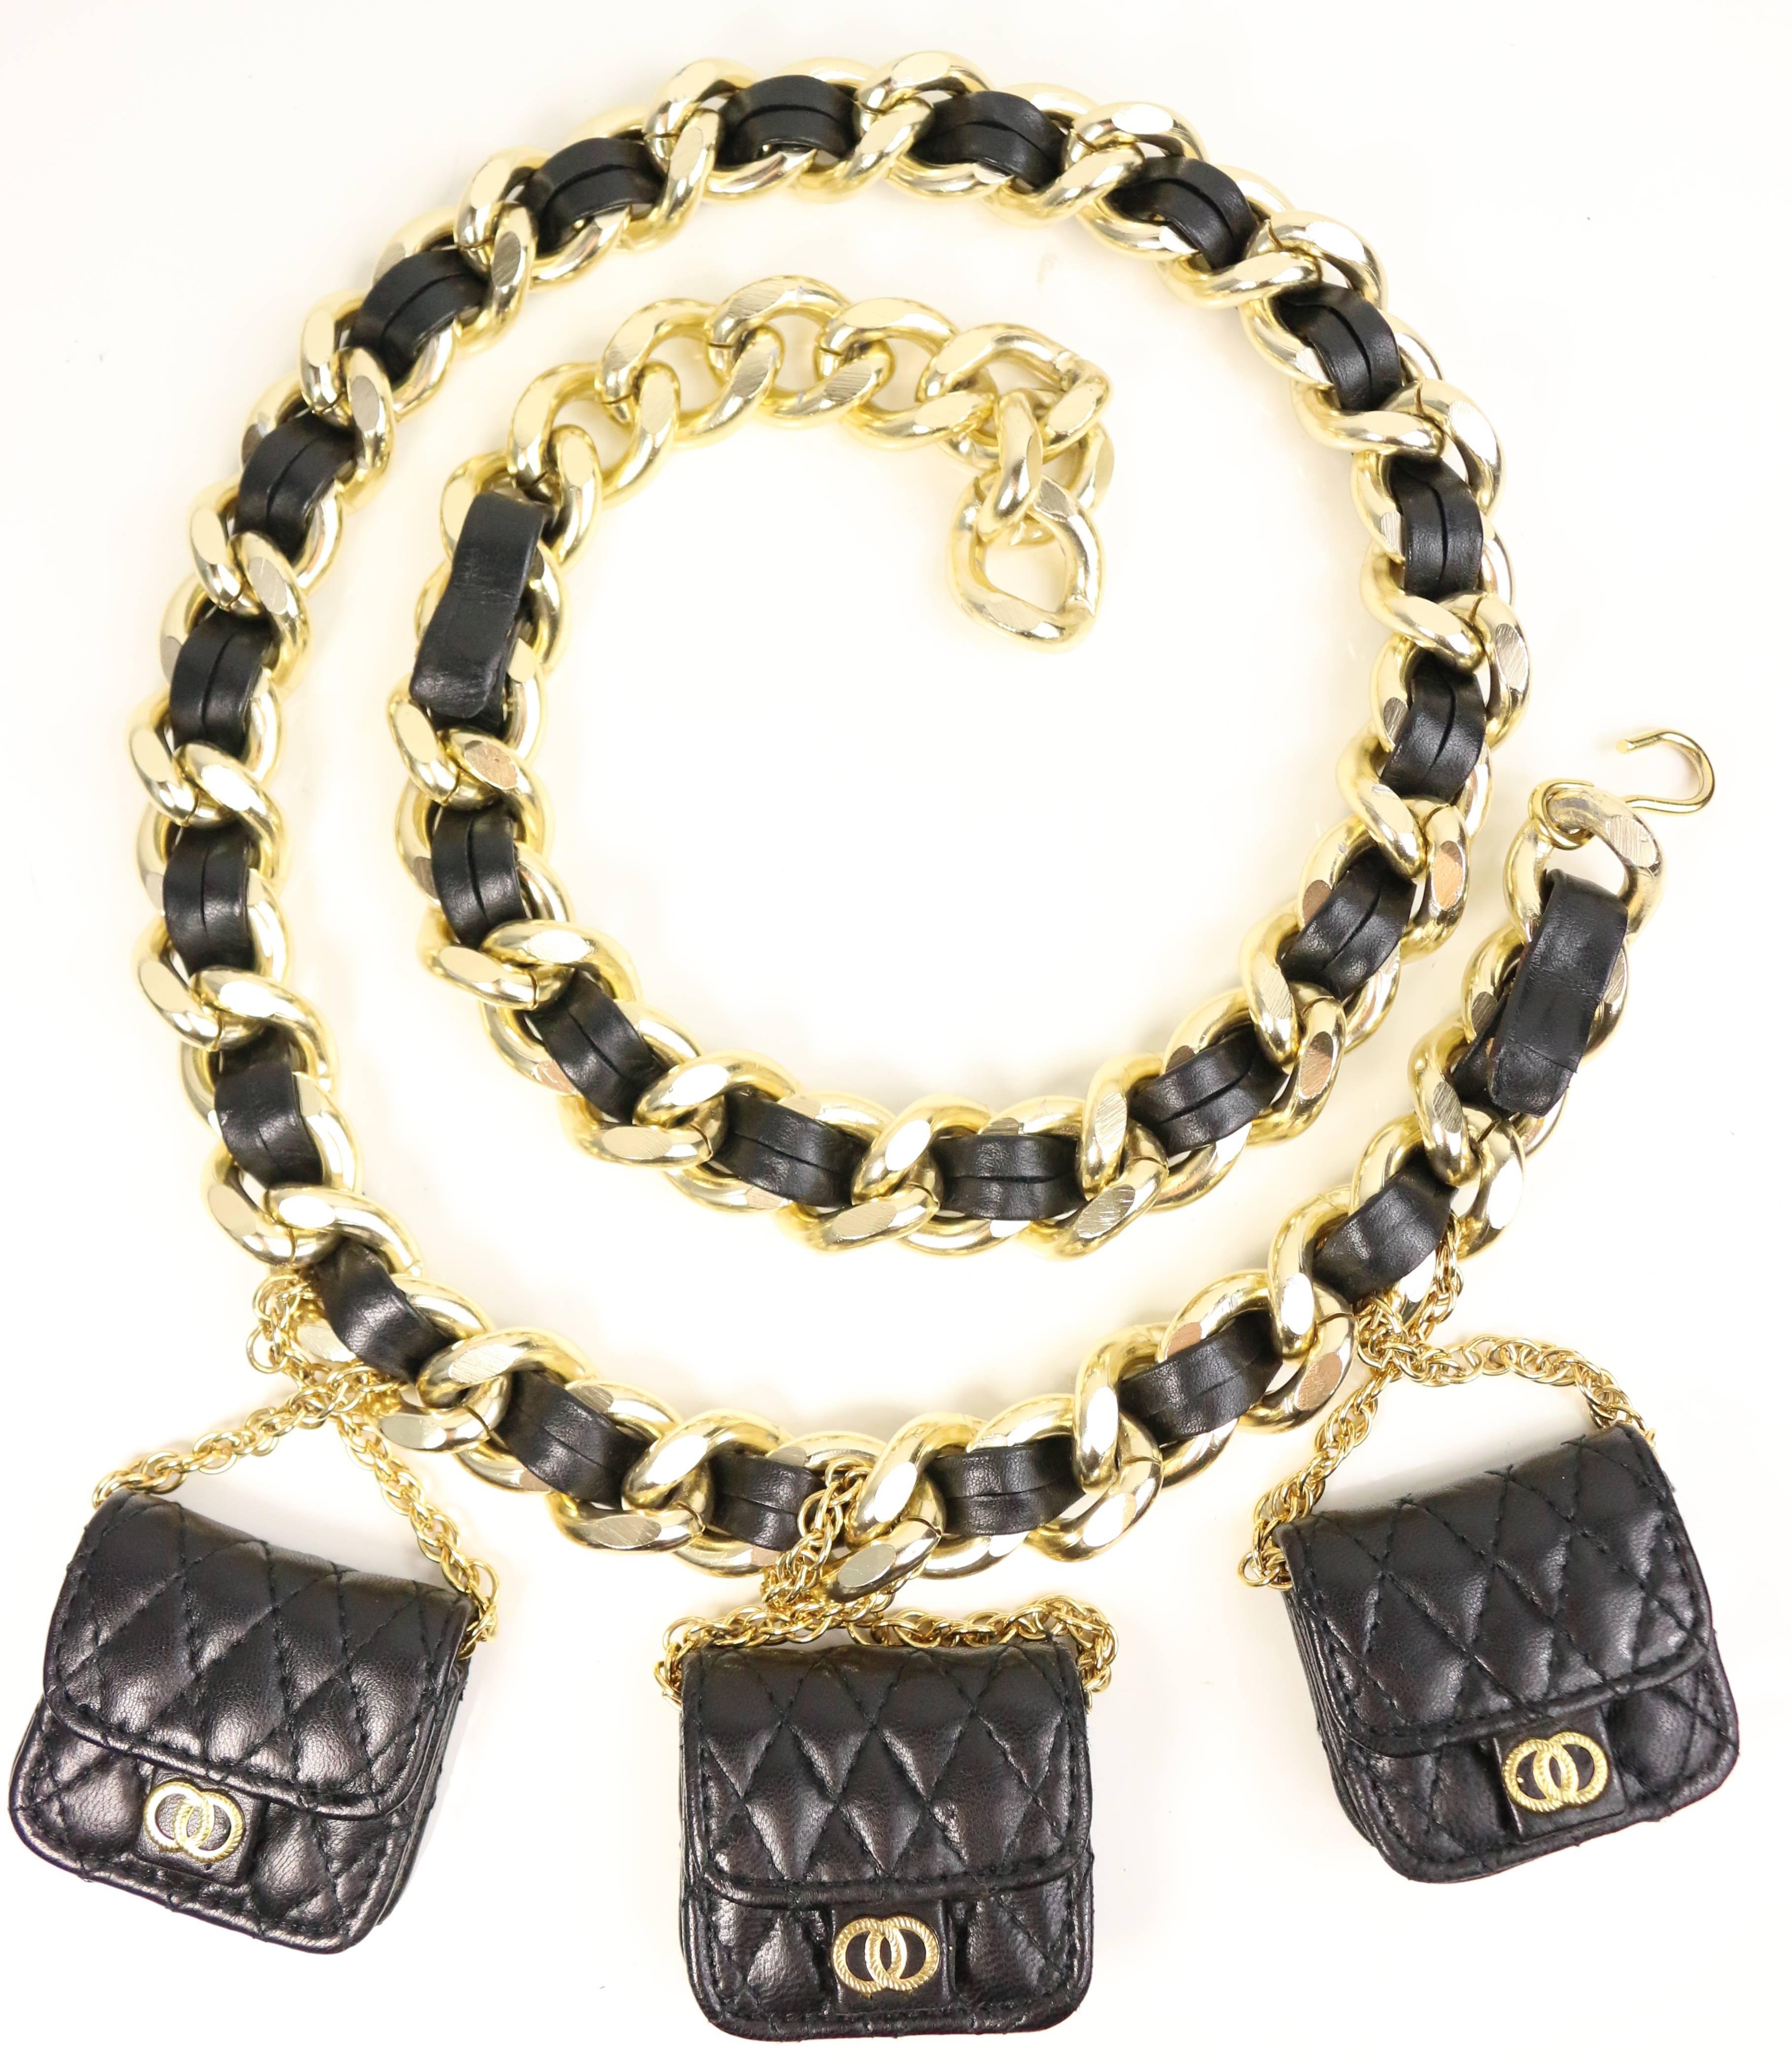 - Vintage 80s black leather gold chain link belt attached with three drop black mini quilted leather gold chain flap handbag. 

- Length: 39 inches. (you can hook wherever you want.)

